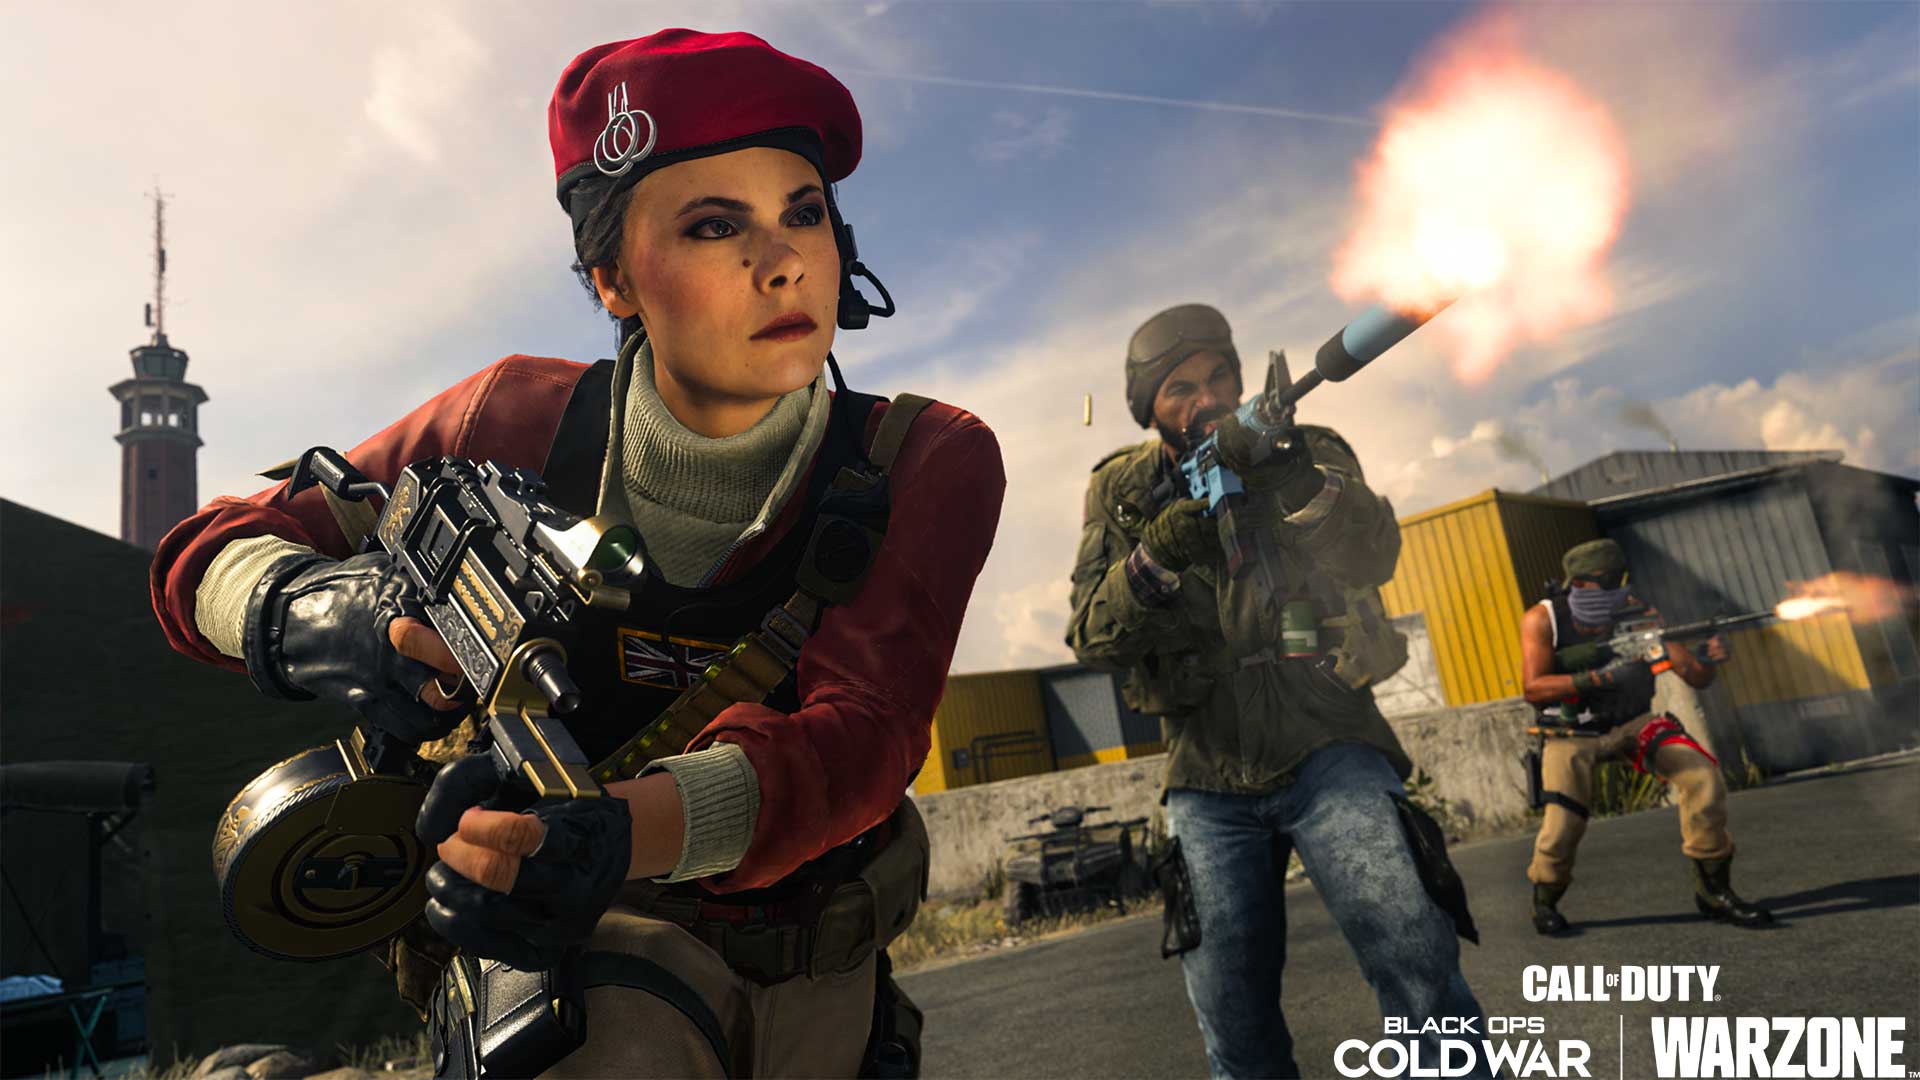 Image for Call of Duty: Black Ops Cold War and FIFA 21 were the top PlayStation downloads in January